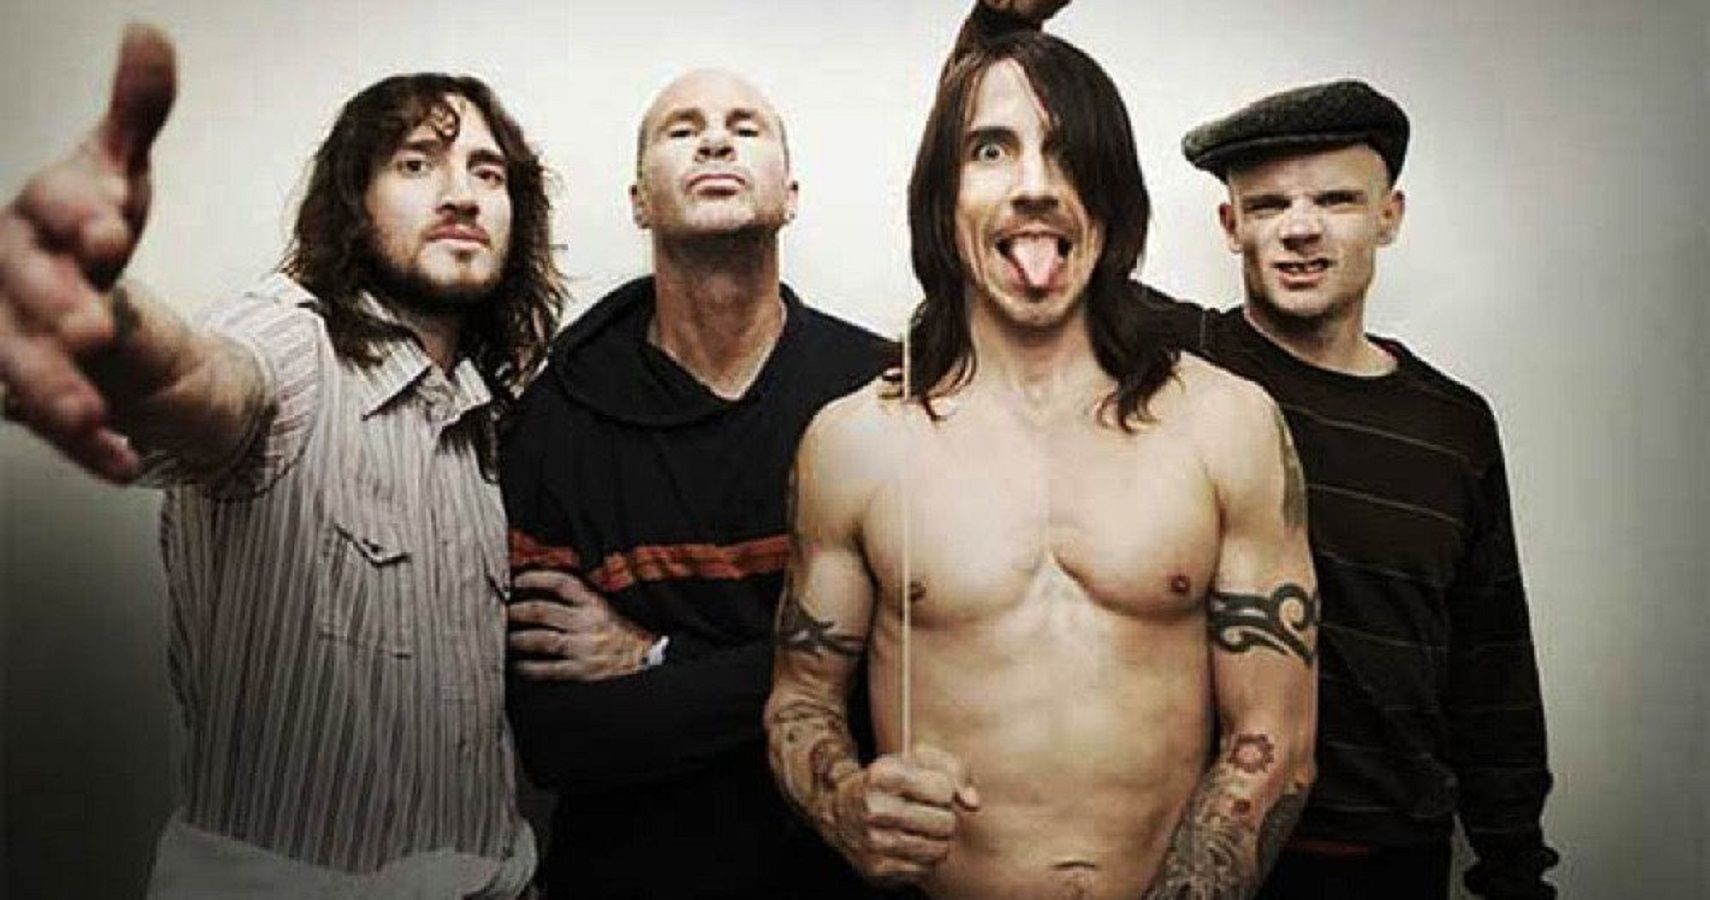 Red pepper клипы. Red hot Chili Peppers. Ред хот Чили пеперс. Red Chili Peppers группа. RHCP 2000.